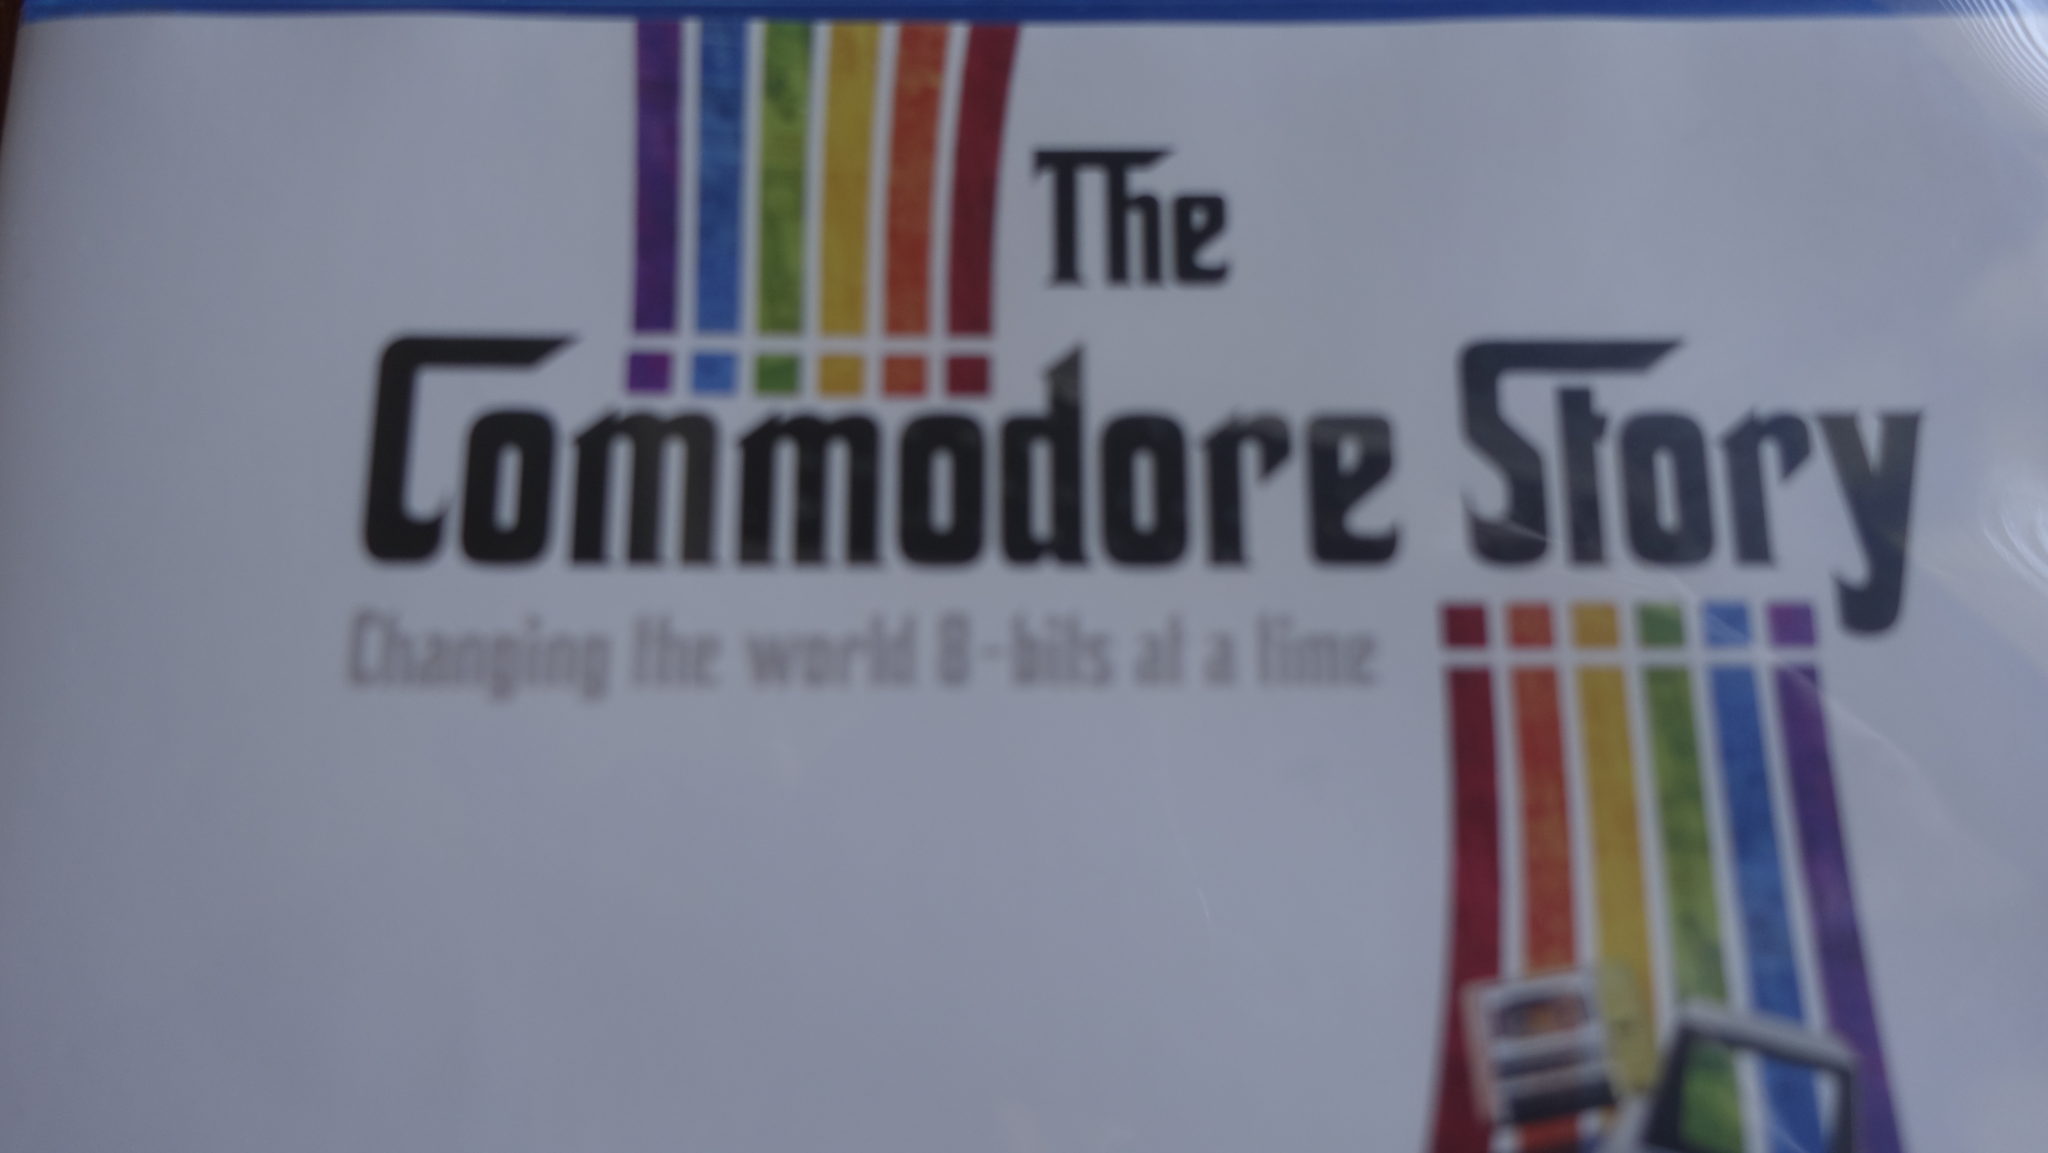 The Commodore Story – Changing the world 8-bits at a time Review